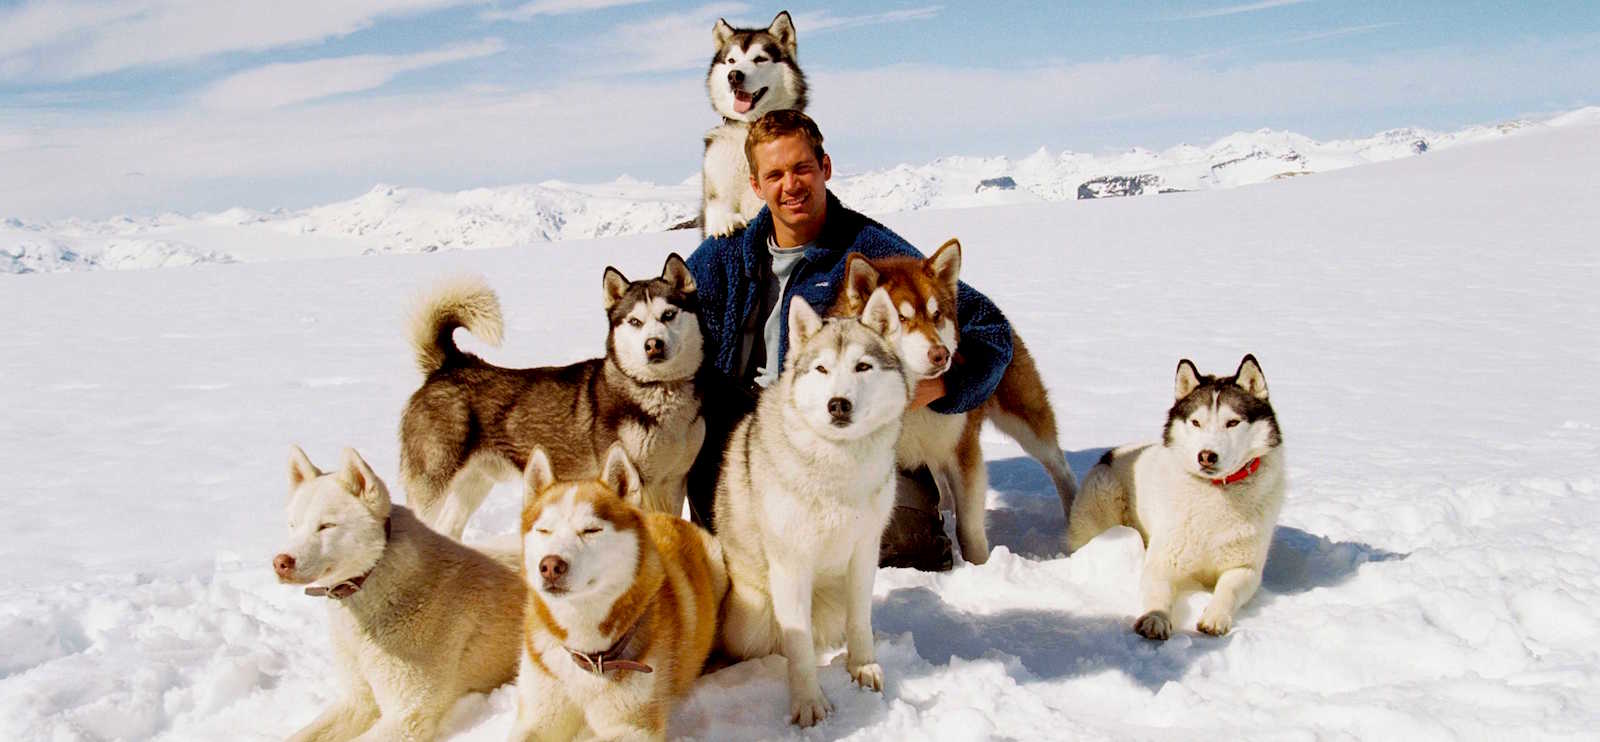 Paul Walker with dogs. ©2006 Buena Vista Pictures Distribution and Winking Productions GmbH & Co. KG